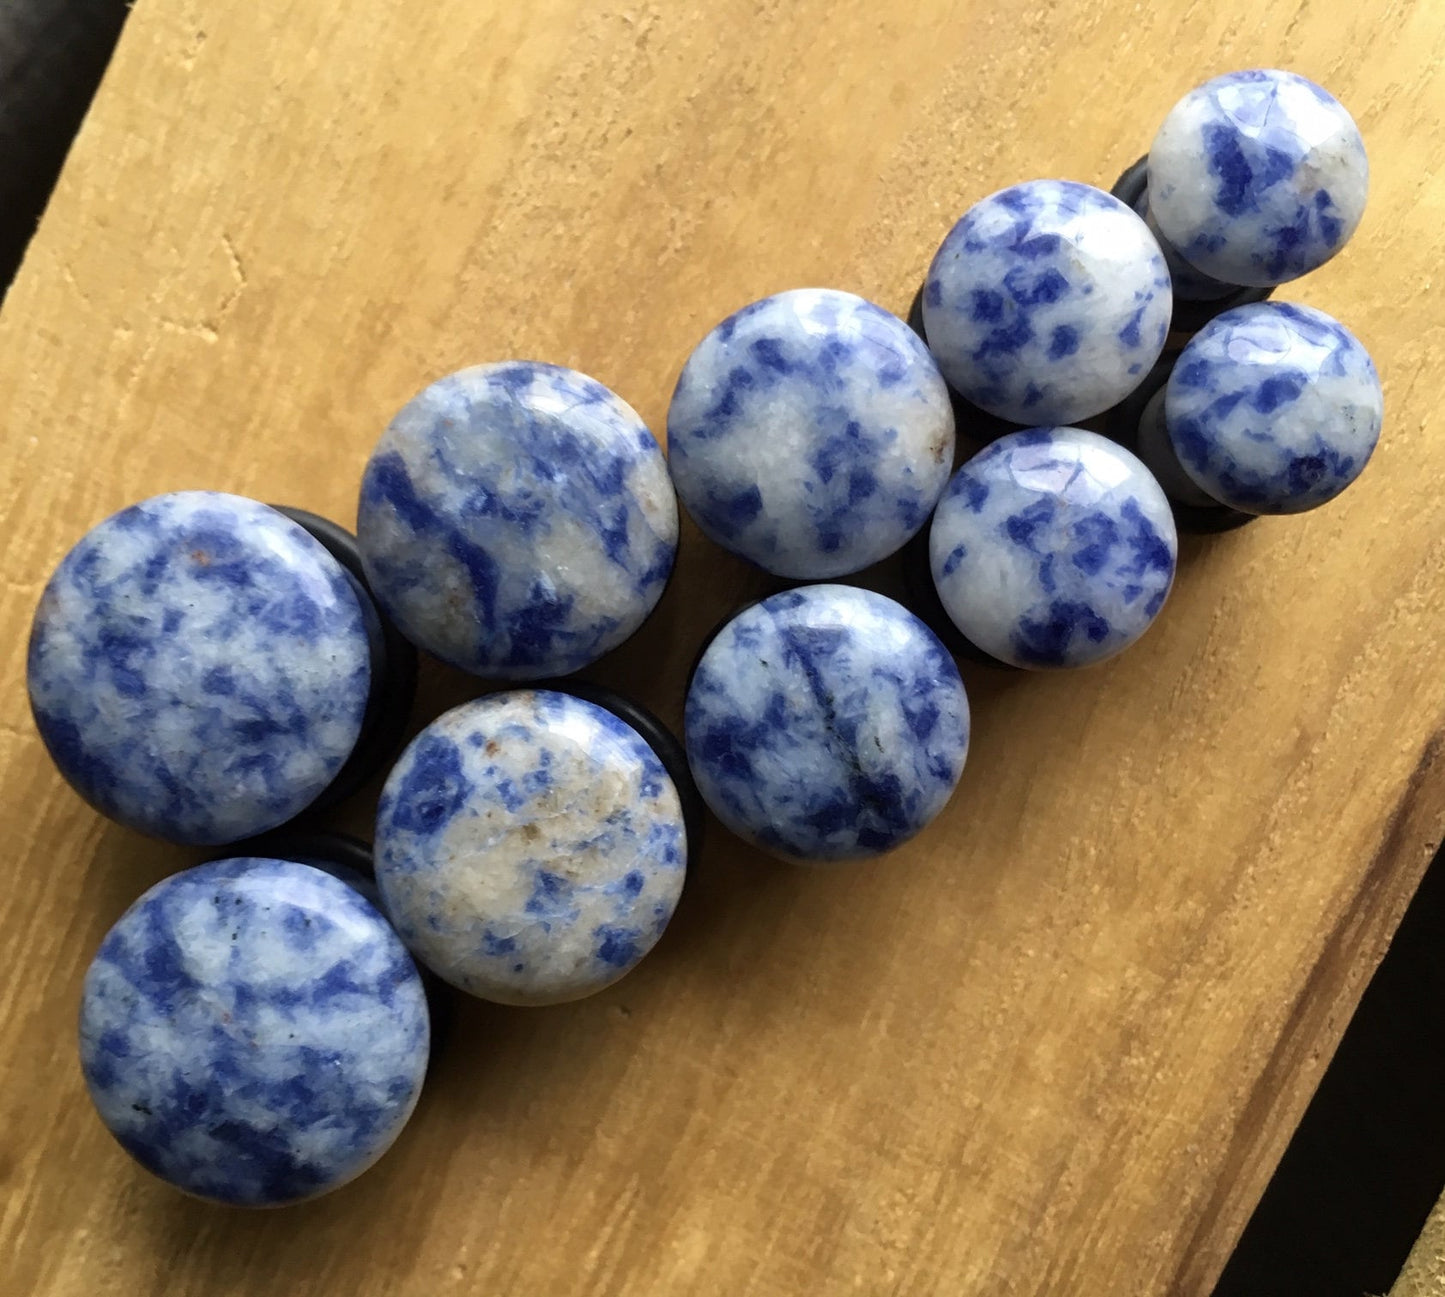 PAIR of Organic Blue Spot Jasper Single Flare Stone Plugs with O-Rings - Gauges 4g (5mm) up to 5/8" (16mm) Available!